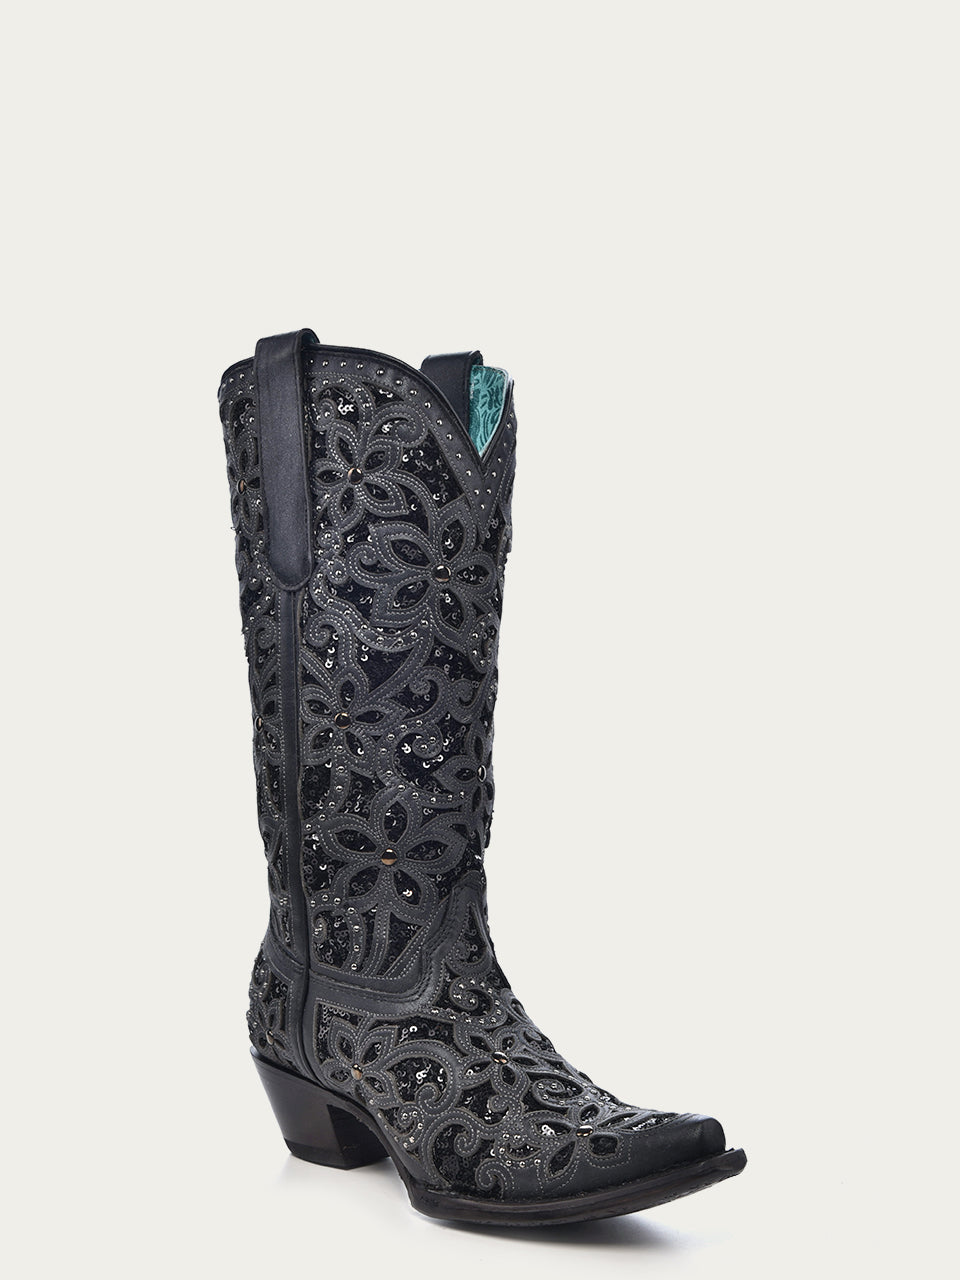 A3752 - WOMEN'S BLACK GLITTER INLAY FLORAL OVERLAY WITH CRYSTALS AND STUDS SNIP TOE BLACK COWBOY BOOT